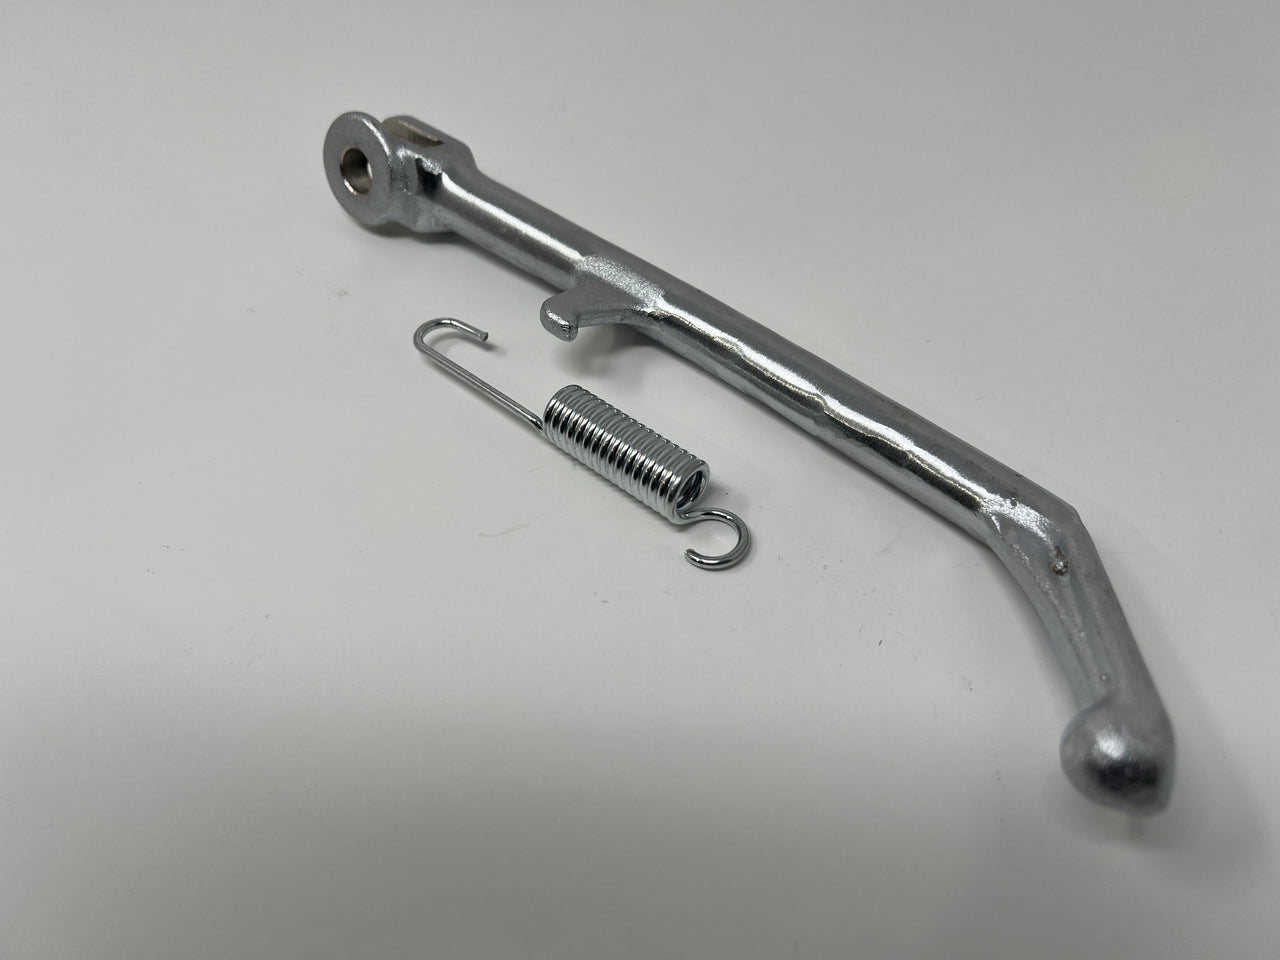 X18 50cc GY6 Motorcycle Main Stand / Kickstand (02010424 / 07020061)